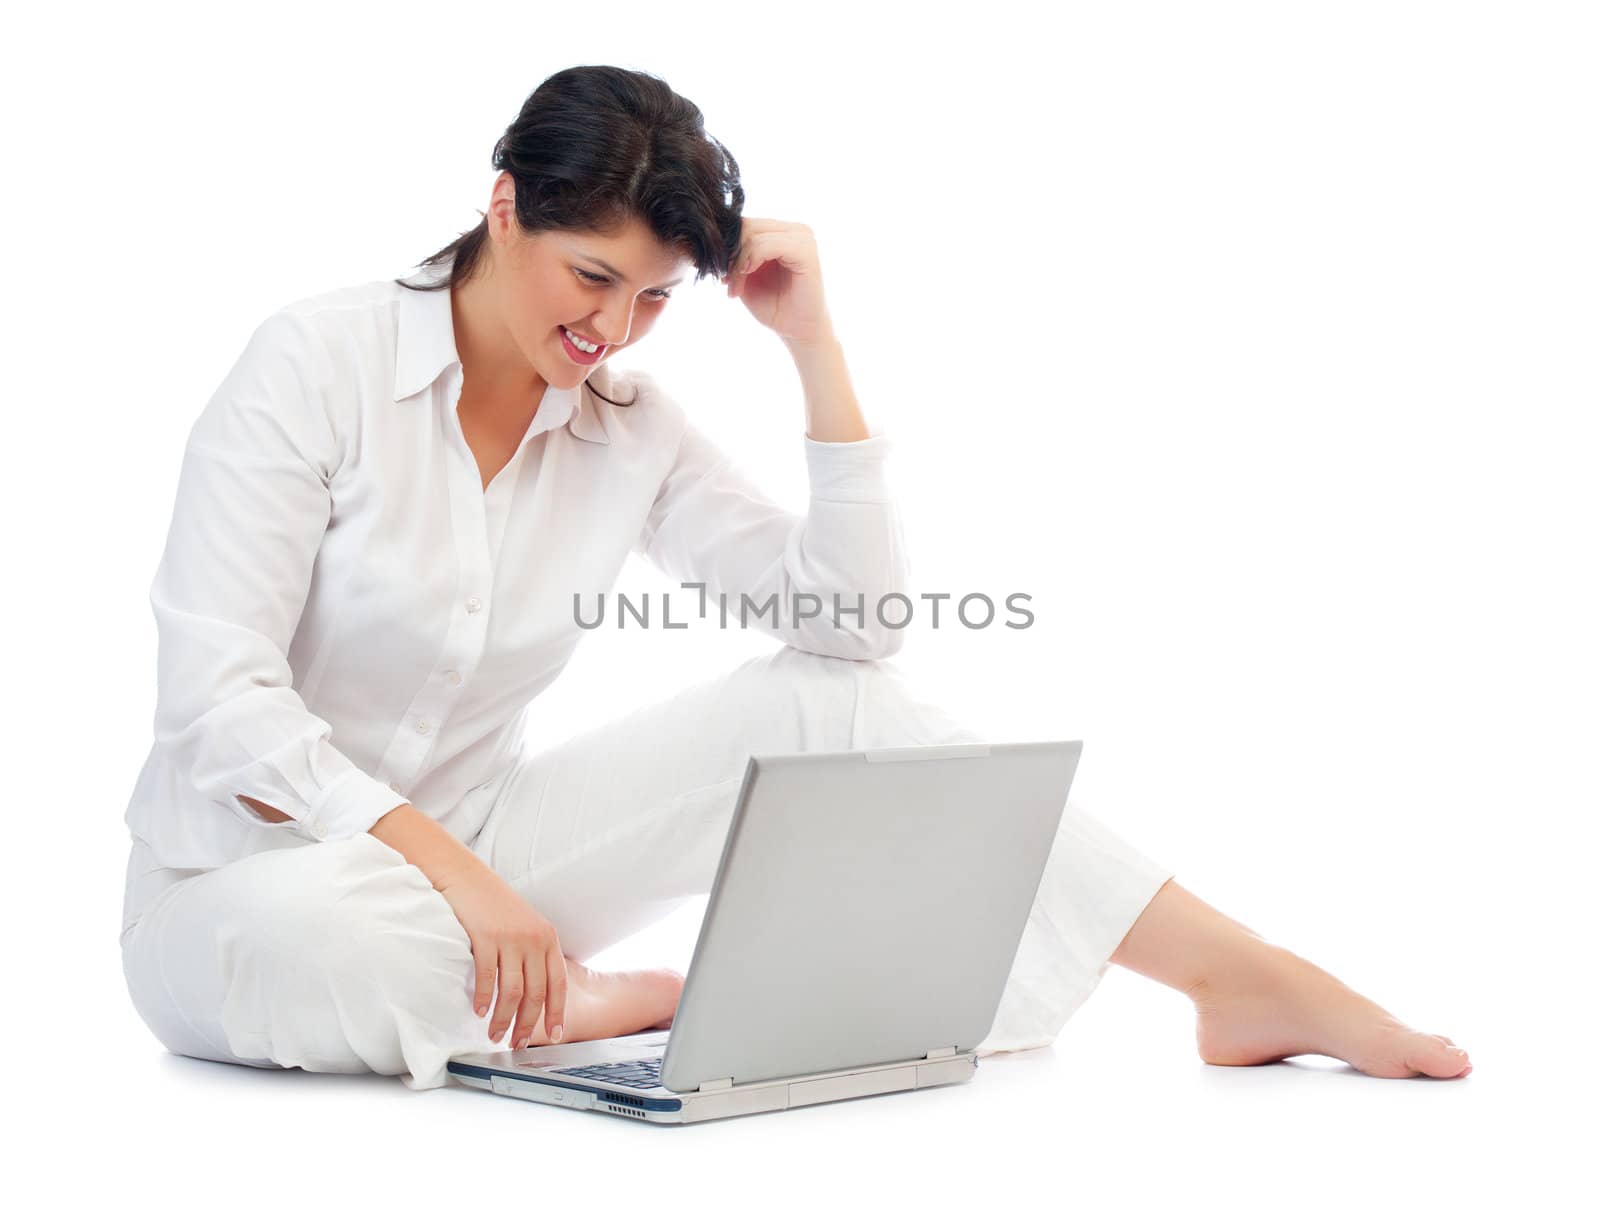 Young woman with laptop isolated